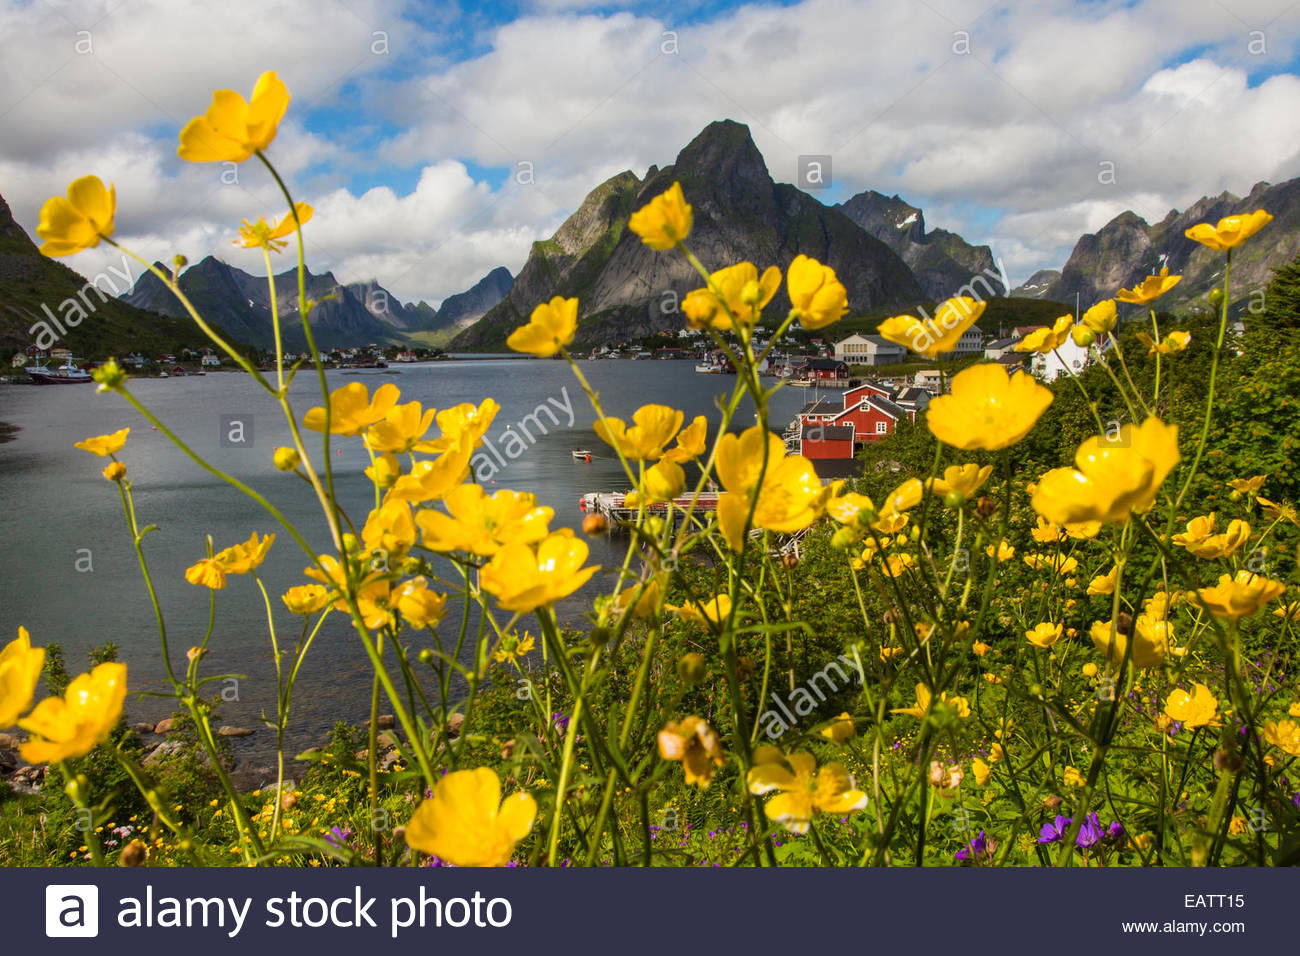 View of a coastal town through buttercup wildflowers. Stock Photo